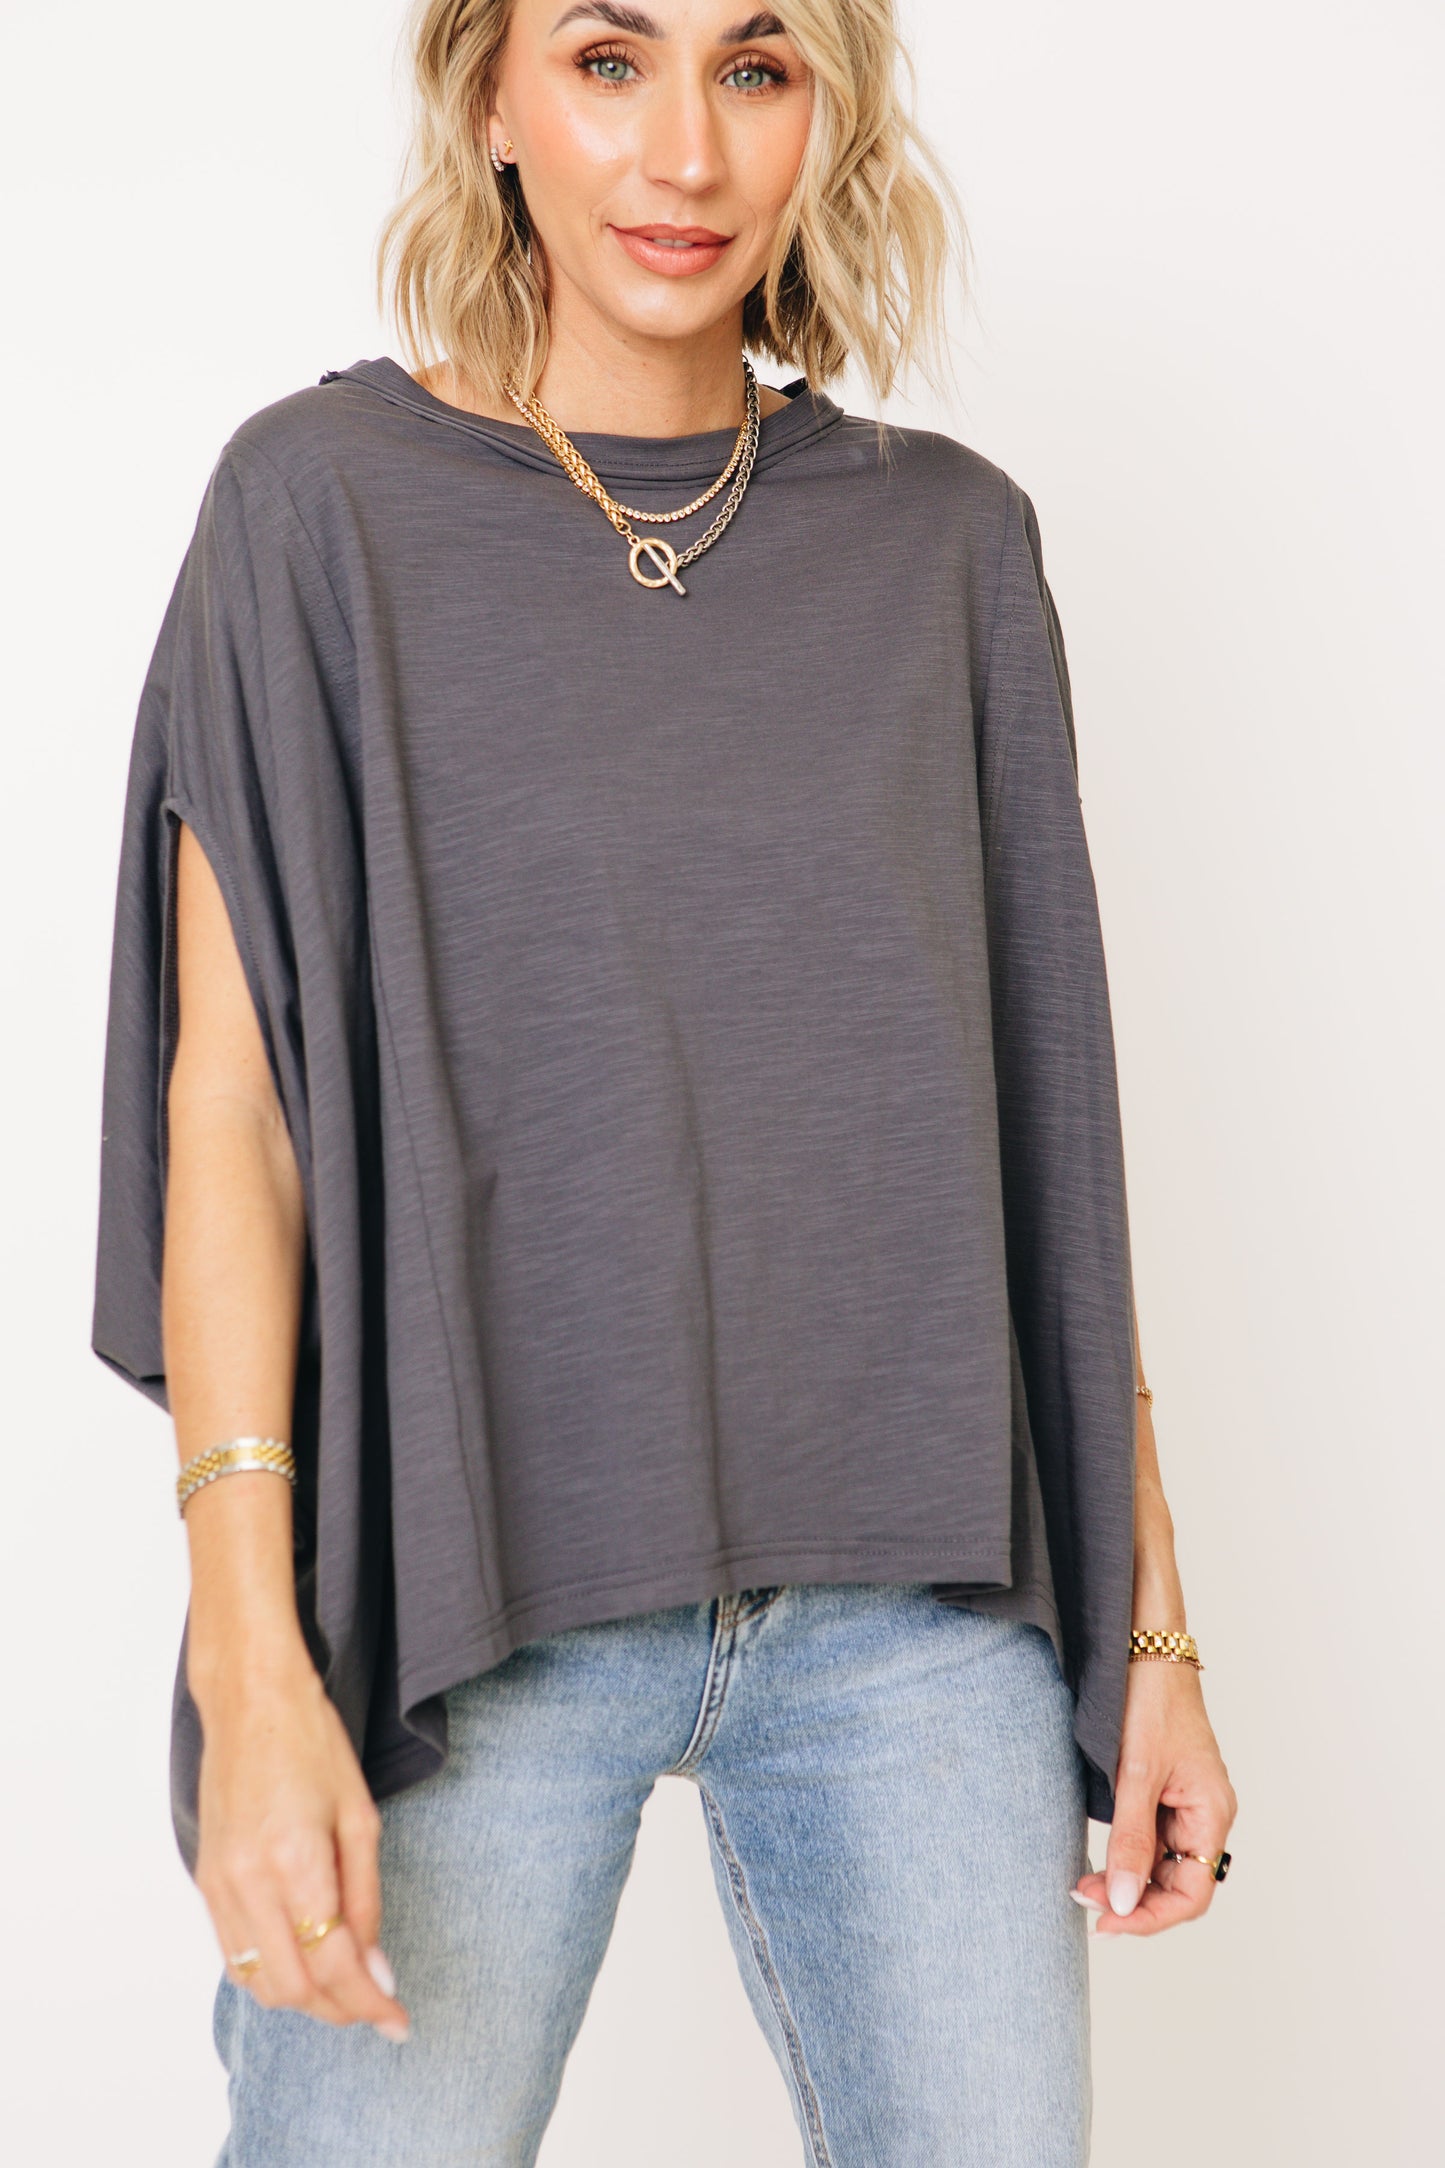 Blair Round Boat Neck Oversized Knit Top (S-3XL)